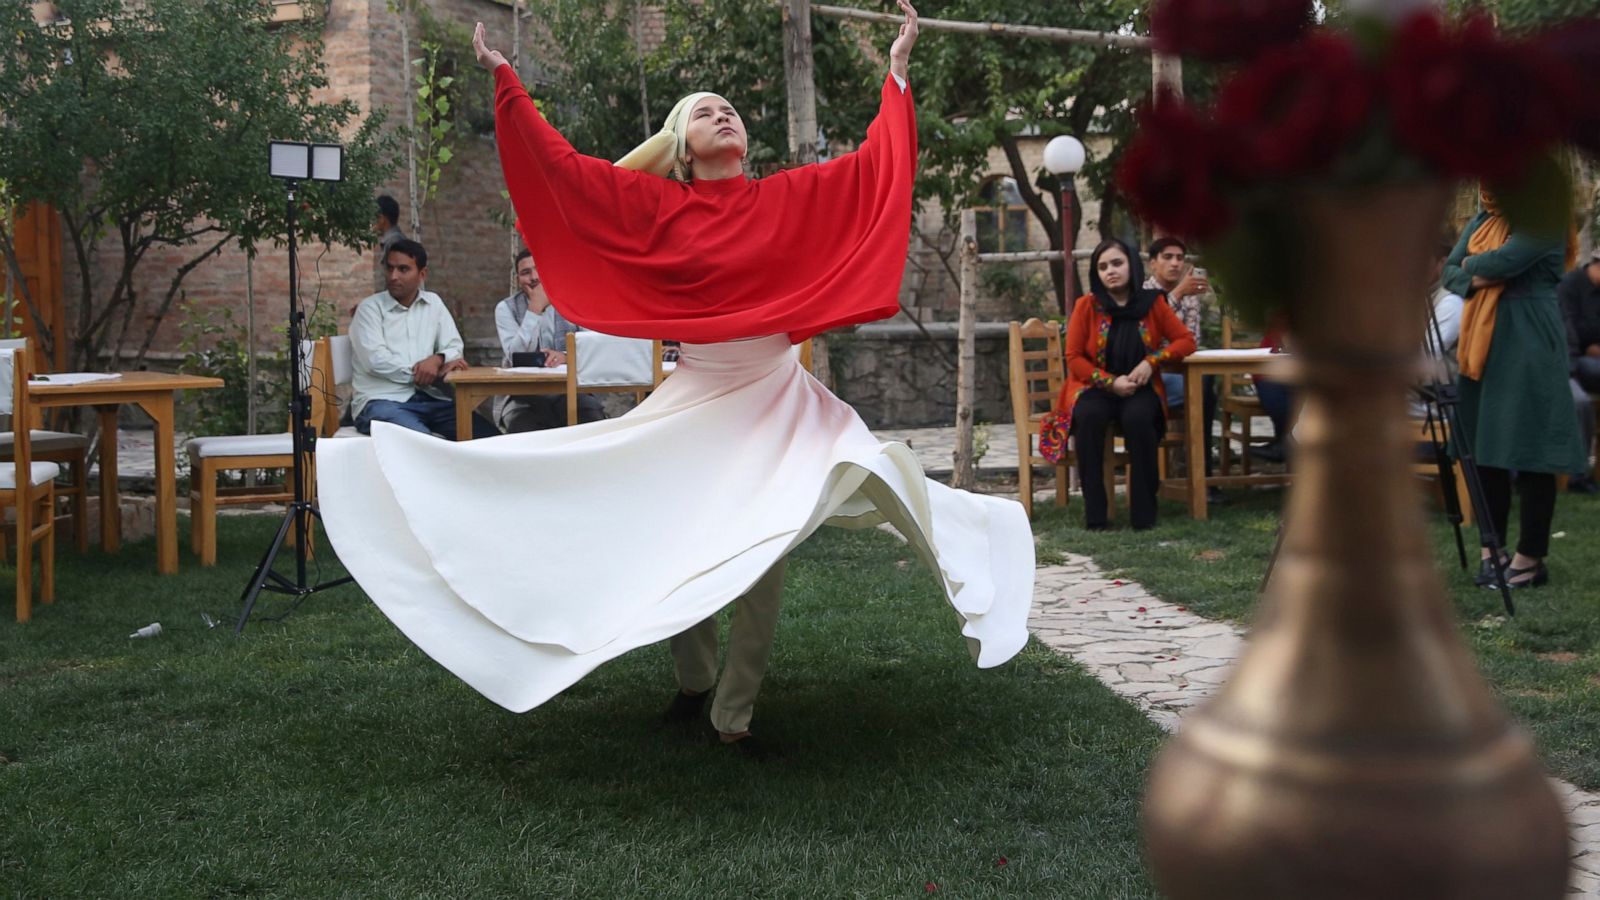 Young Afghan women, men perform whirling Sufi dance together